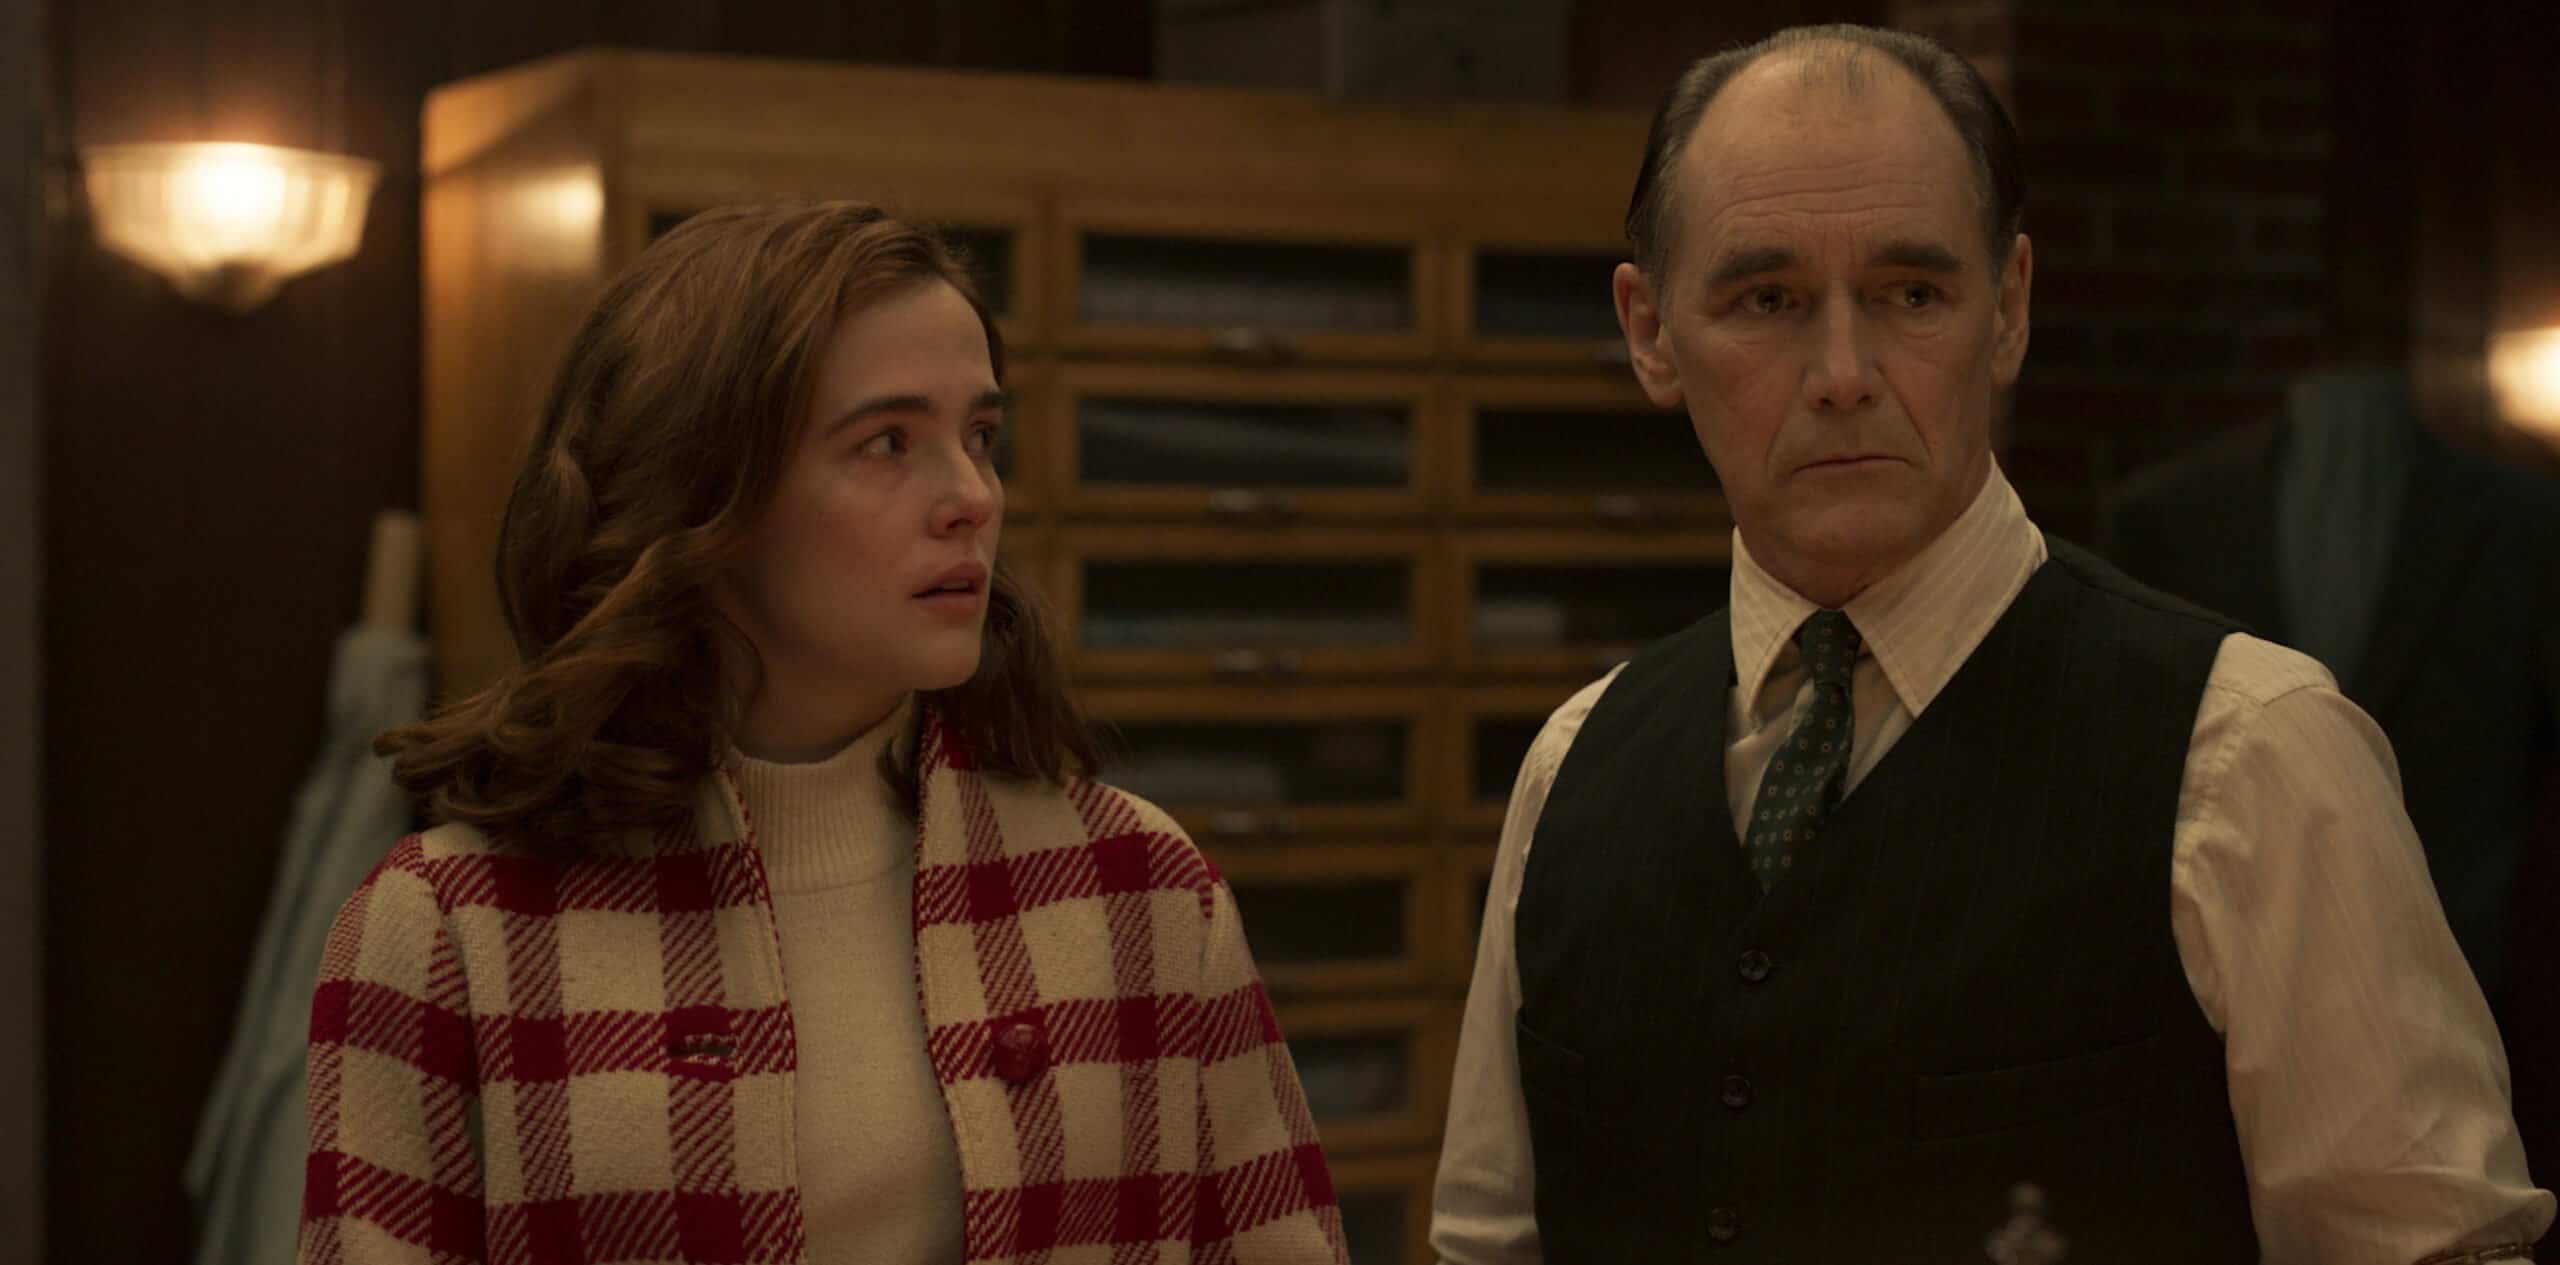 Mable (Zoey Deutch) and Leonard (Mark Rylance) trying to stay alive